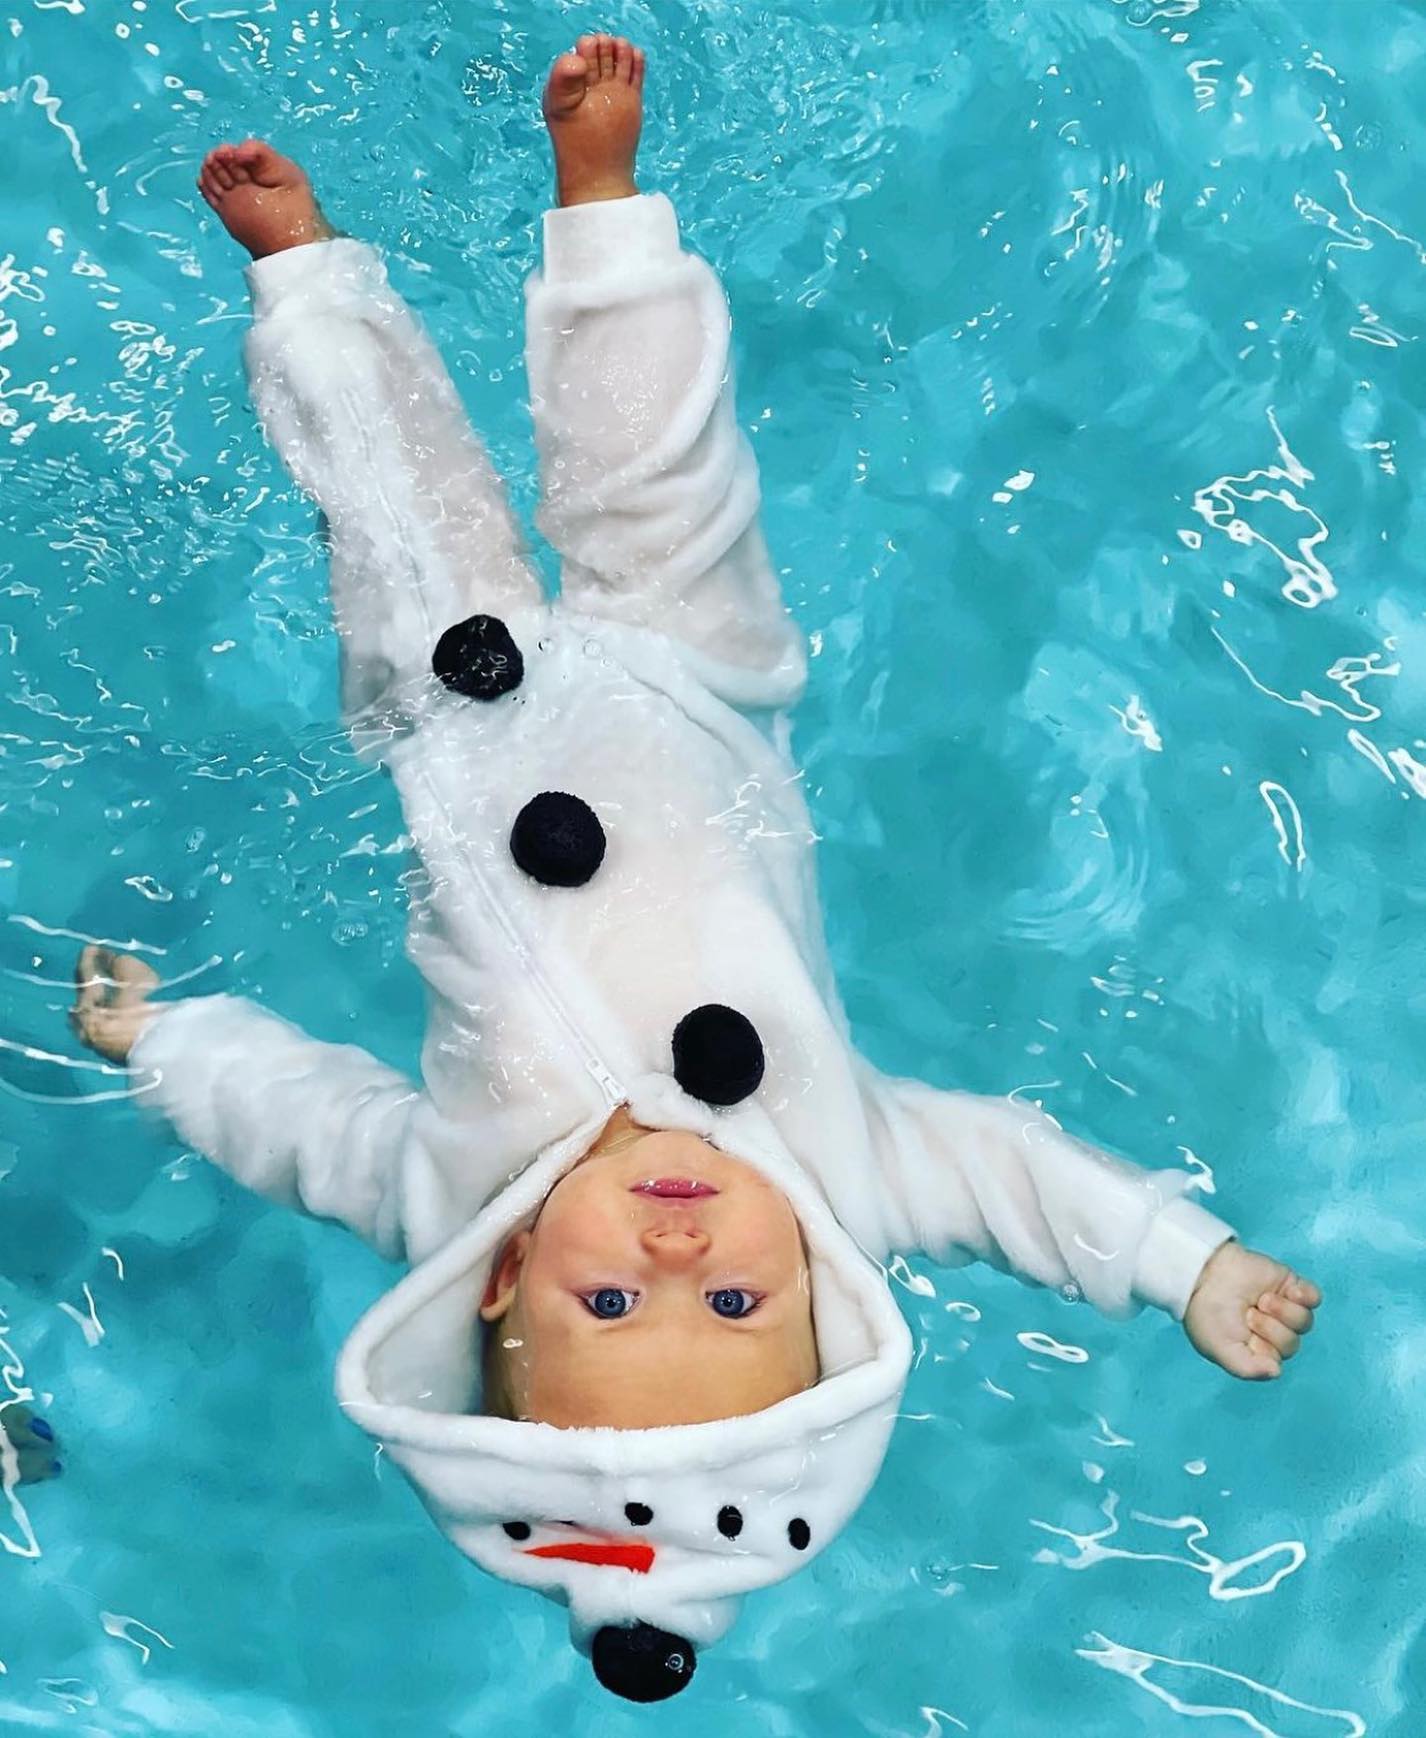 Do you want to build a snowman? ️☃️

Did you know that skill retention tends to be higher in the winter when the only swim time is in lessons, maximizing their sensory motor experience during the learning stage, without outside interference? 

Our program BUILDS confidence for your little swimmer in and out of the water. Register today and let’s spend these winter months in the water together!